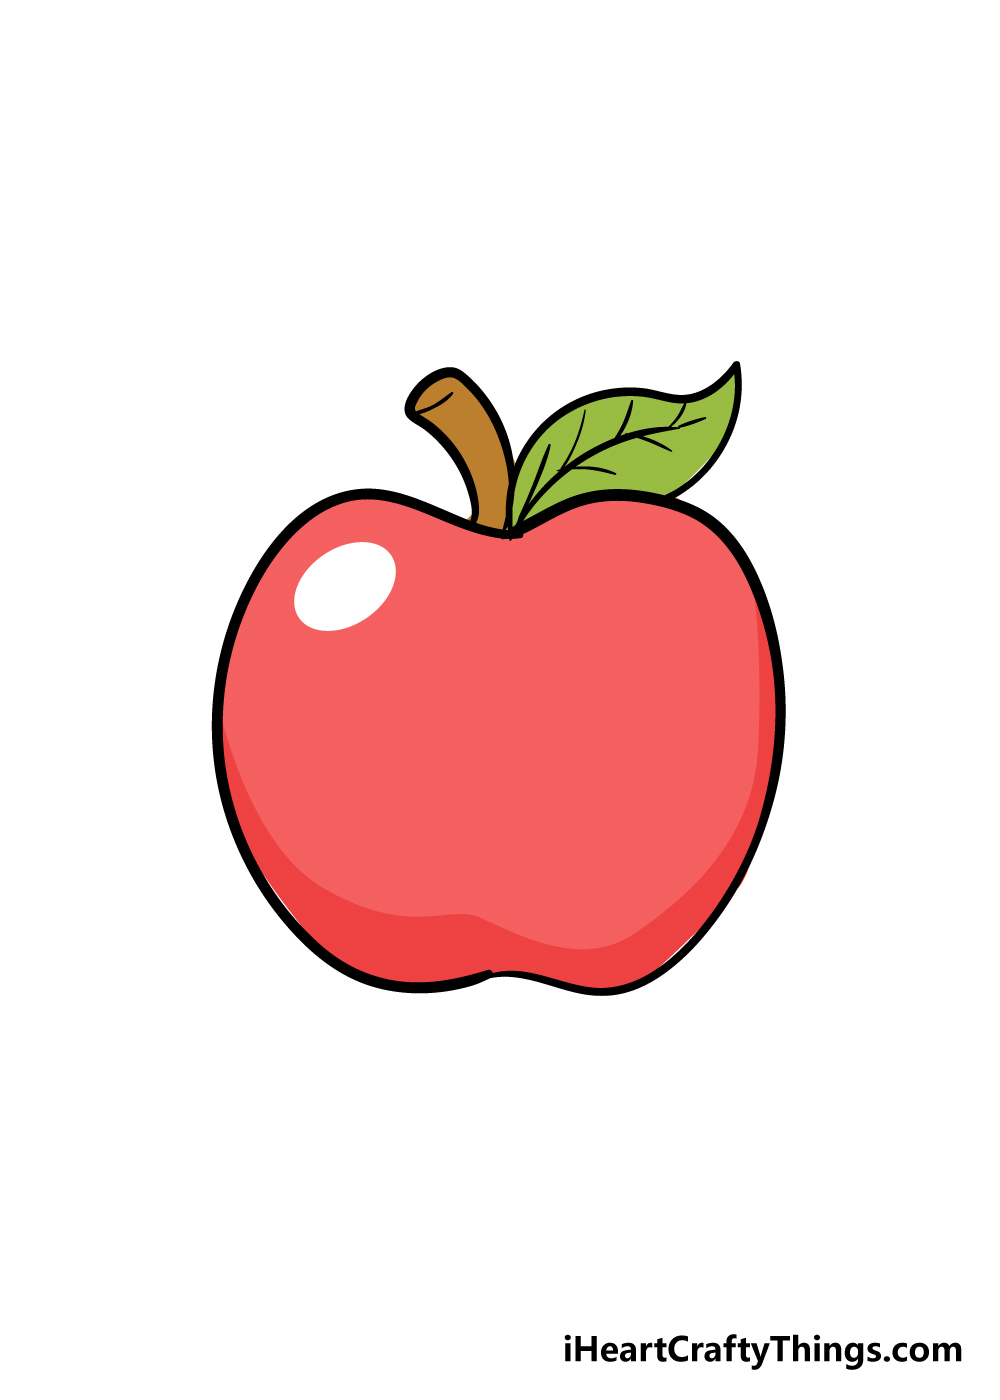 How to Draw An Apple – A Step by Step Guide